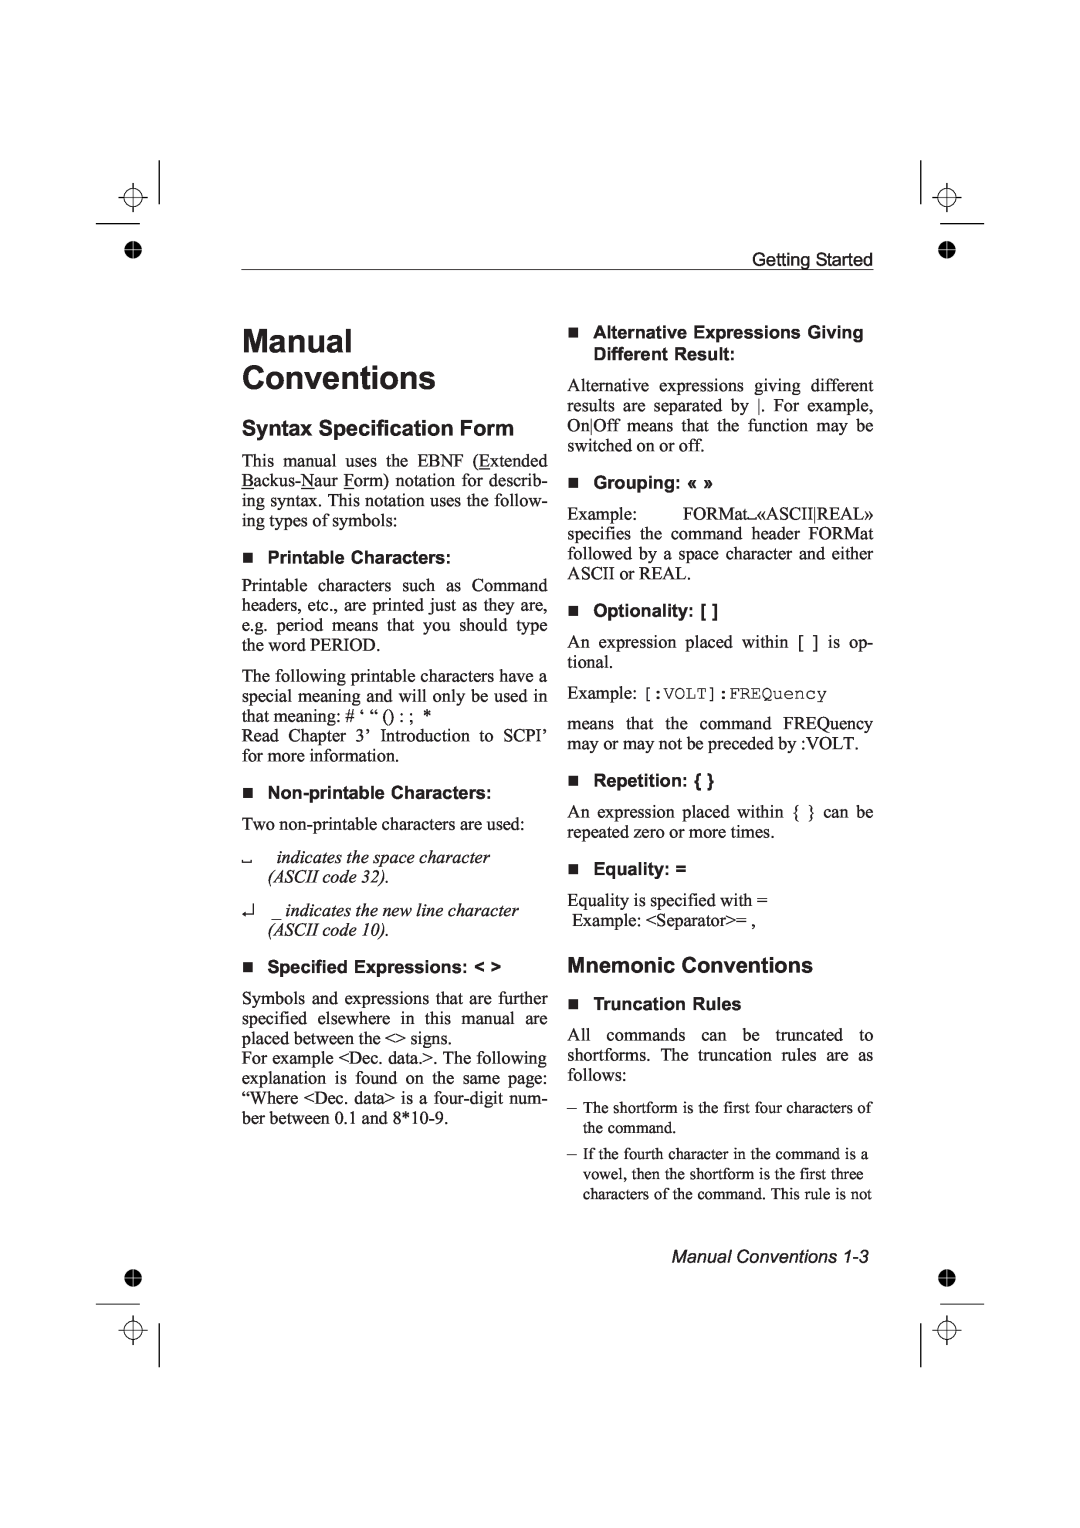 Fluke PM6681 manual Manual Conventions, Syntax Specification Form, Mnemonic Conventions, Printable Characters, Grouping « » 